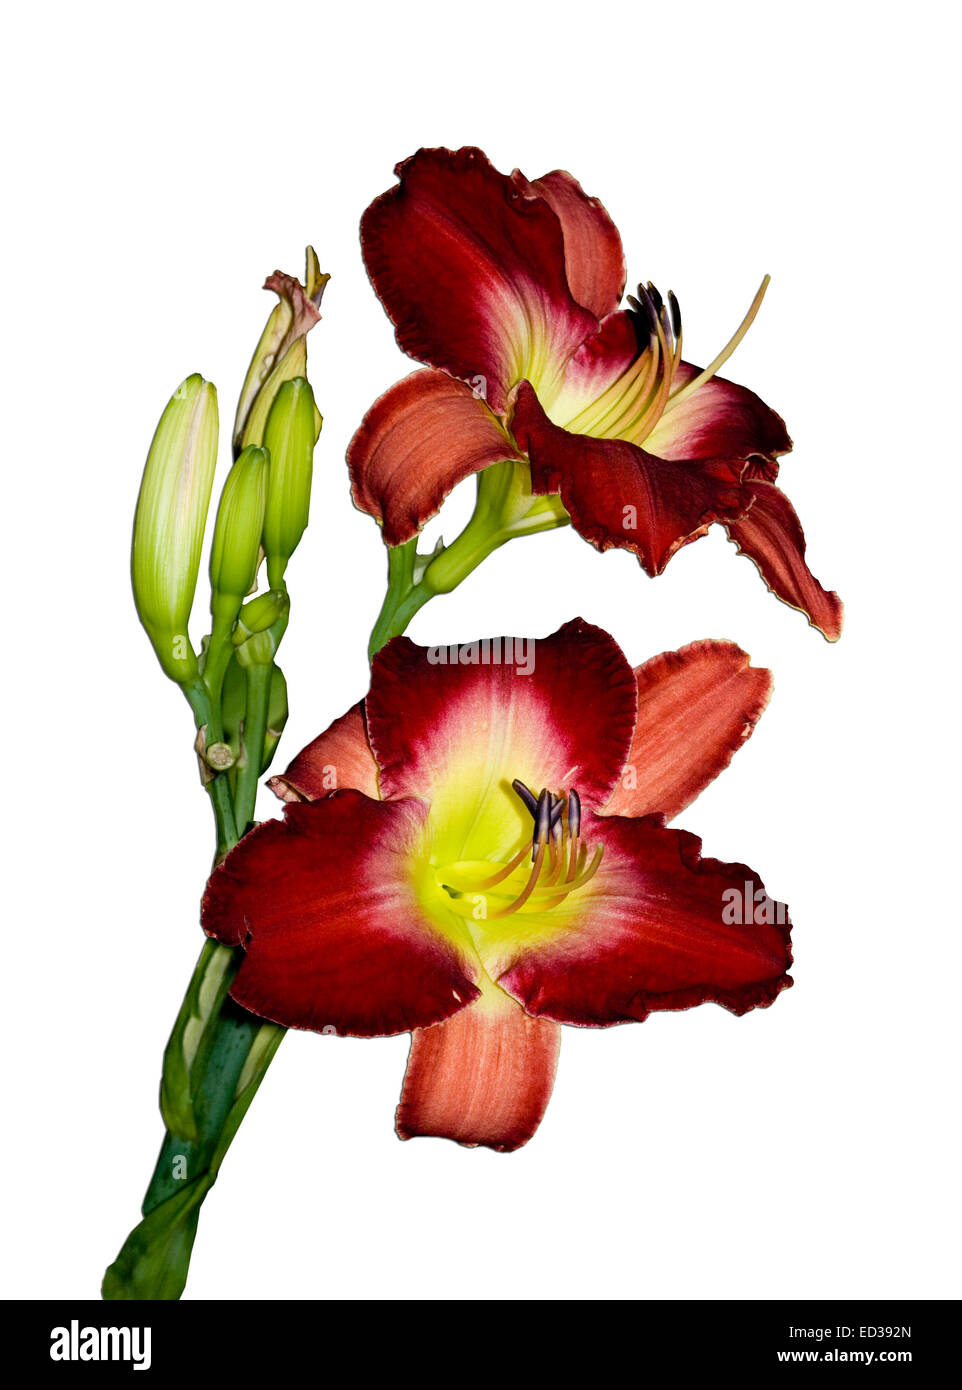 Two large vivid dark red daylily flowers with yellow throats, with buds and dark green stems against plain white background Stock Photo